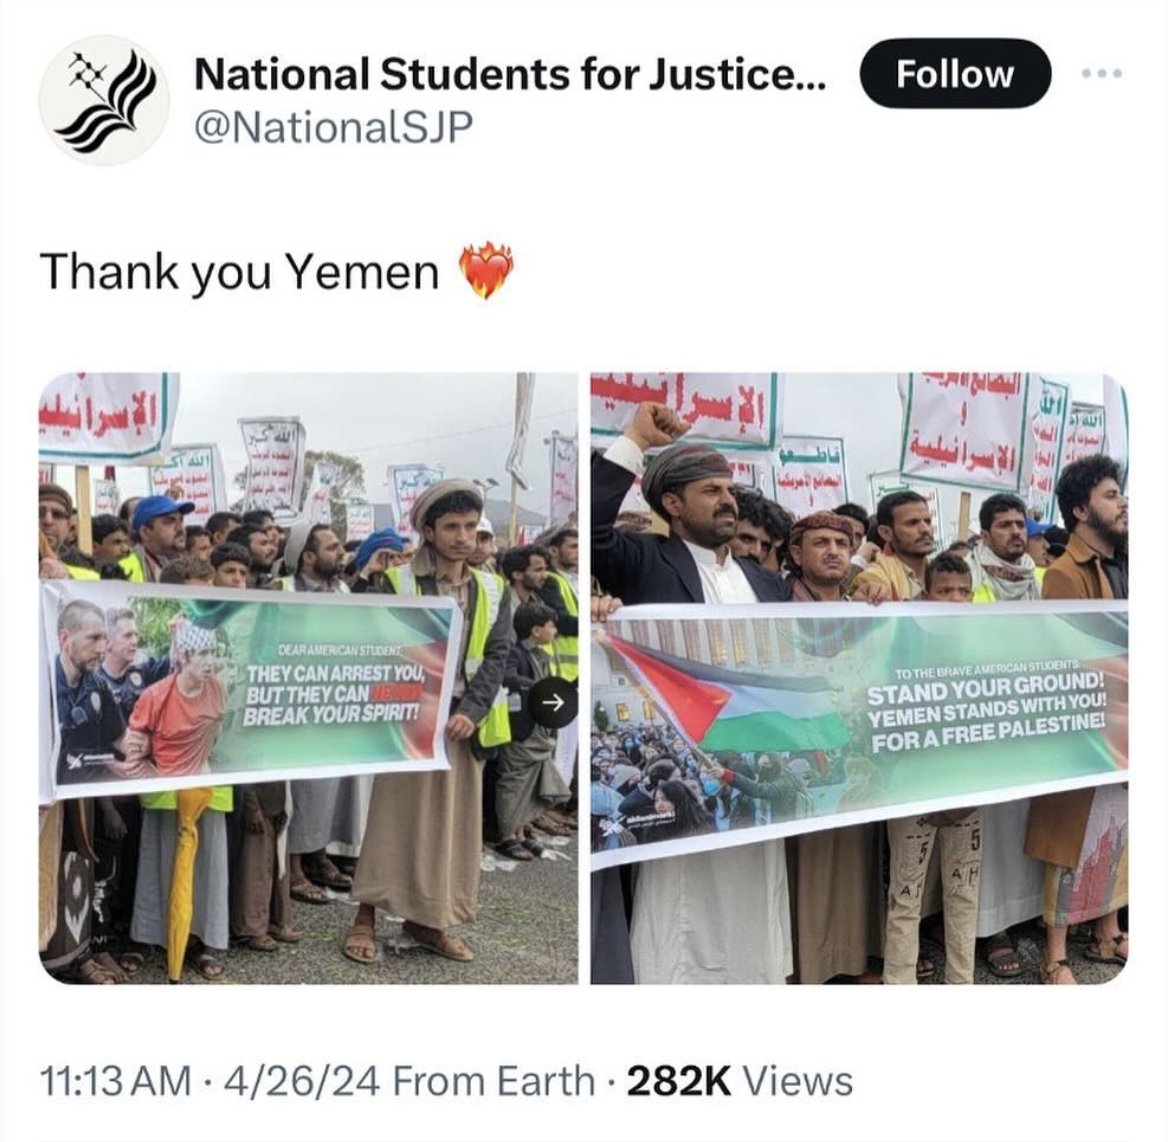 So @NationalSJP deleted this farce from its page after it backfired. However, there has been no apology for promoting a terrorist group or for associating Yemen with the violent and subversive Houthis. Yemenis will never allow you to distort the narrative about Yemen.